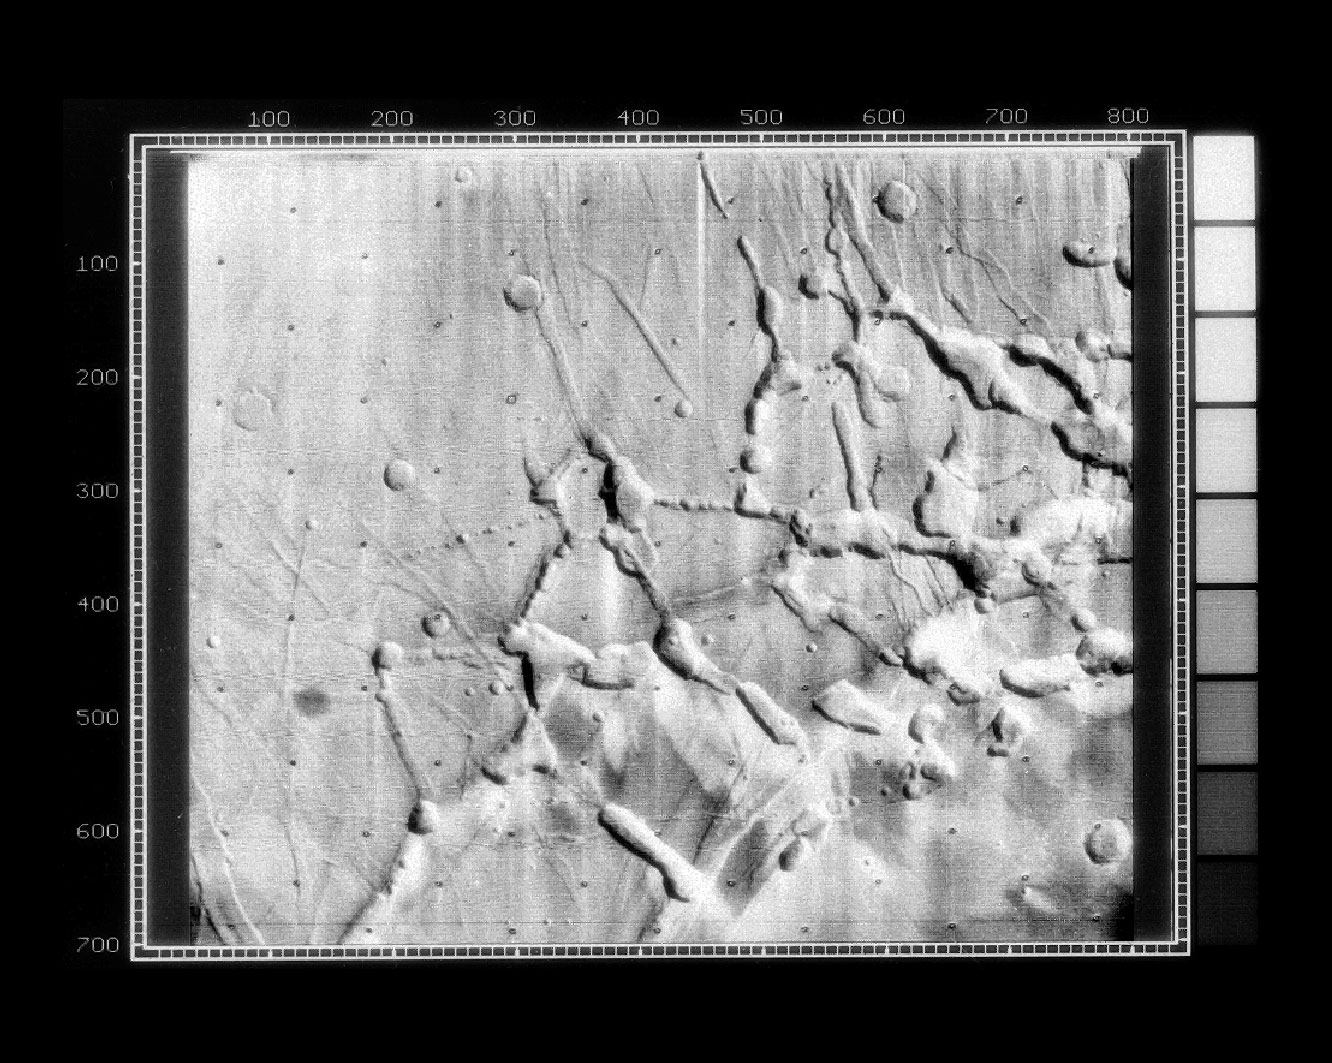 Mariner 9's view of the "labyrinth" at the western end of Vallis Marineris on Mars.